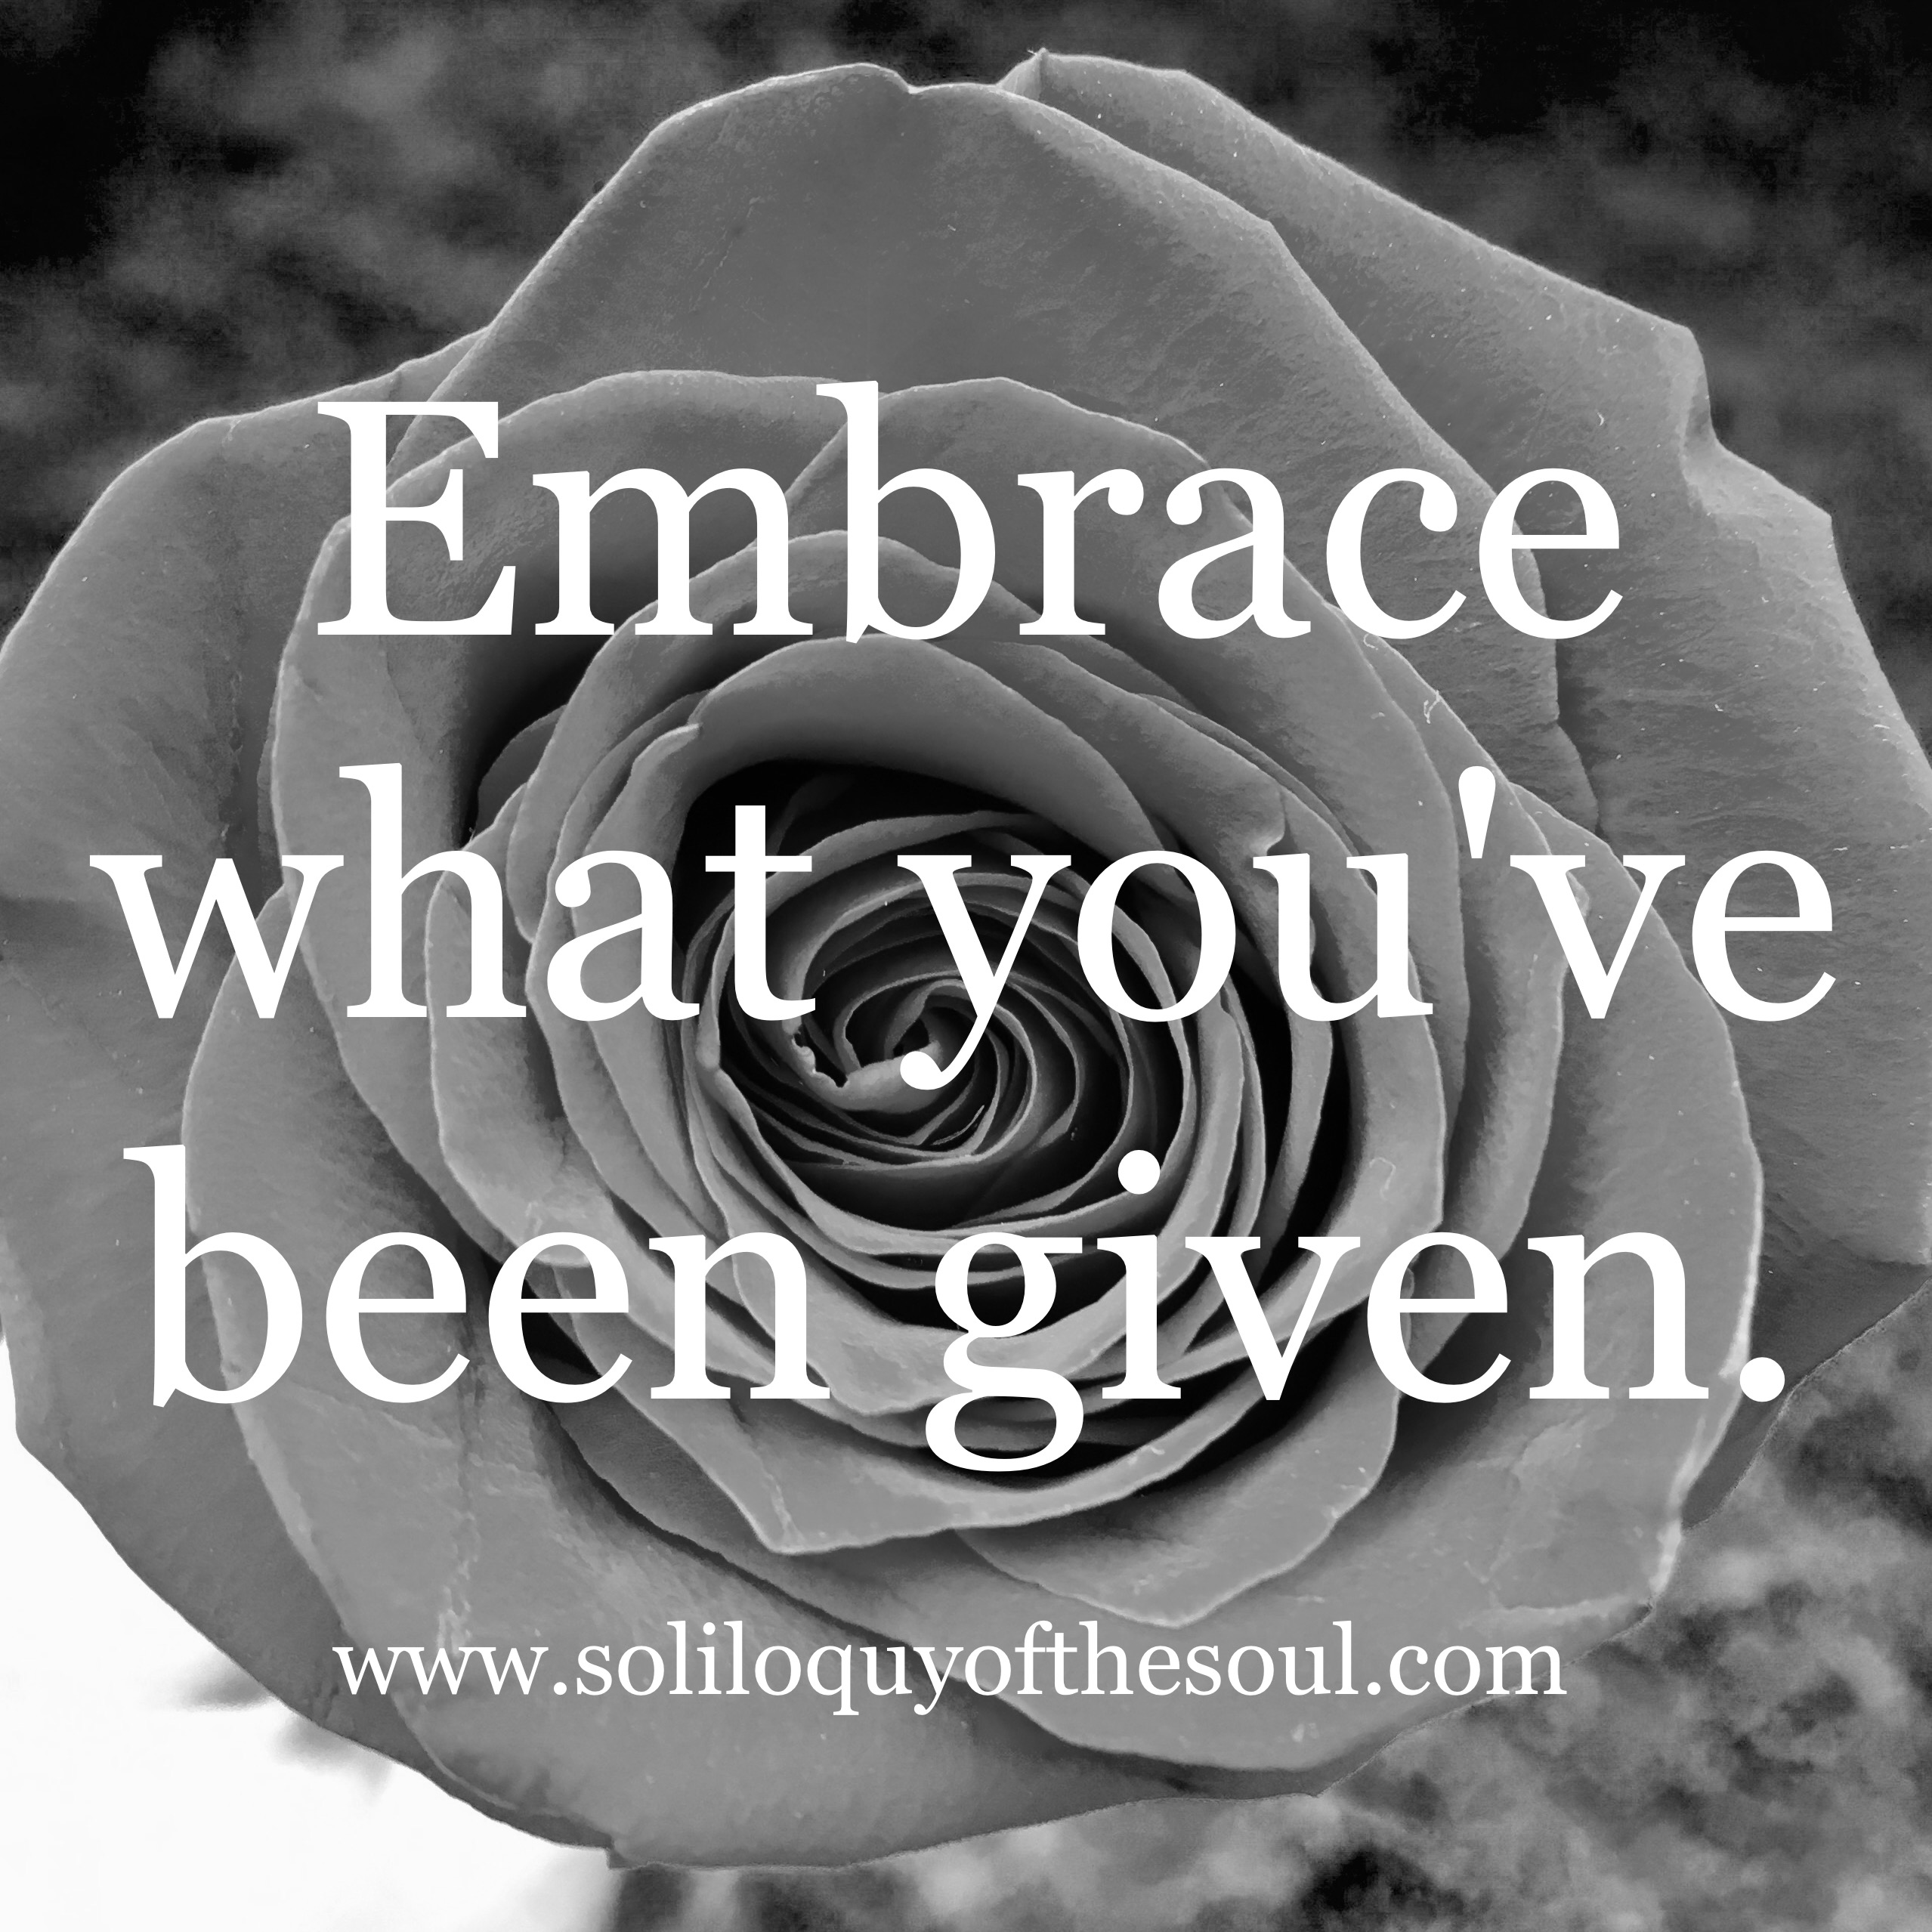 Learning to embrace what is given.